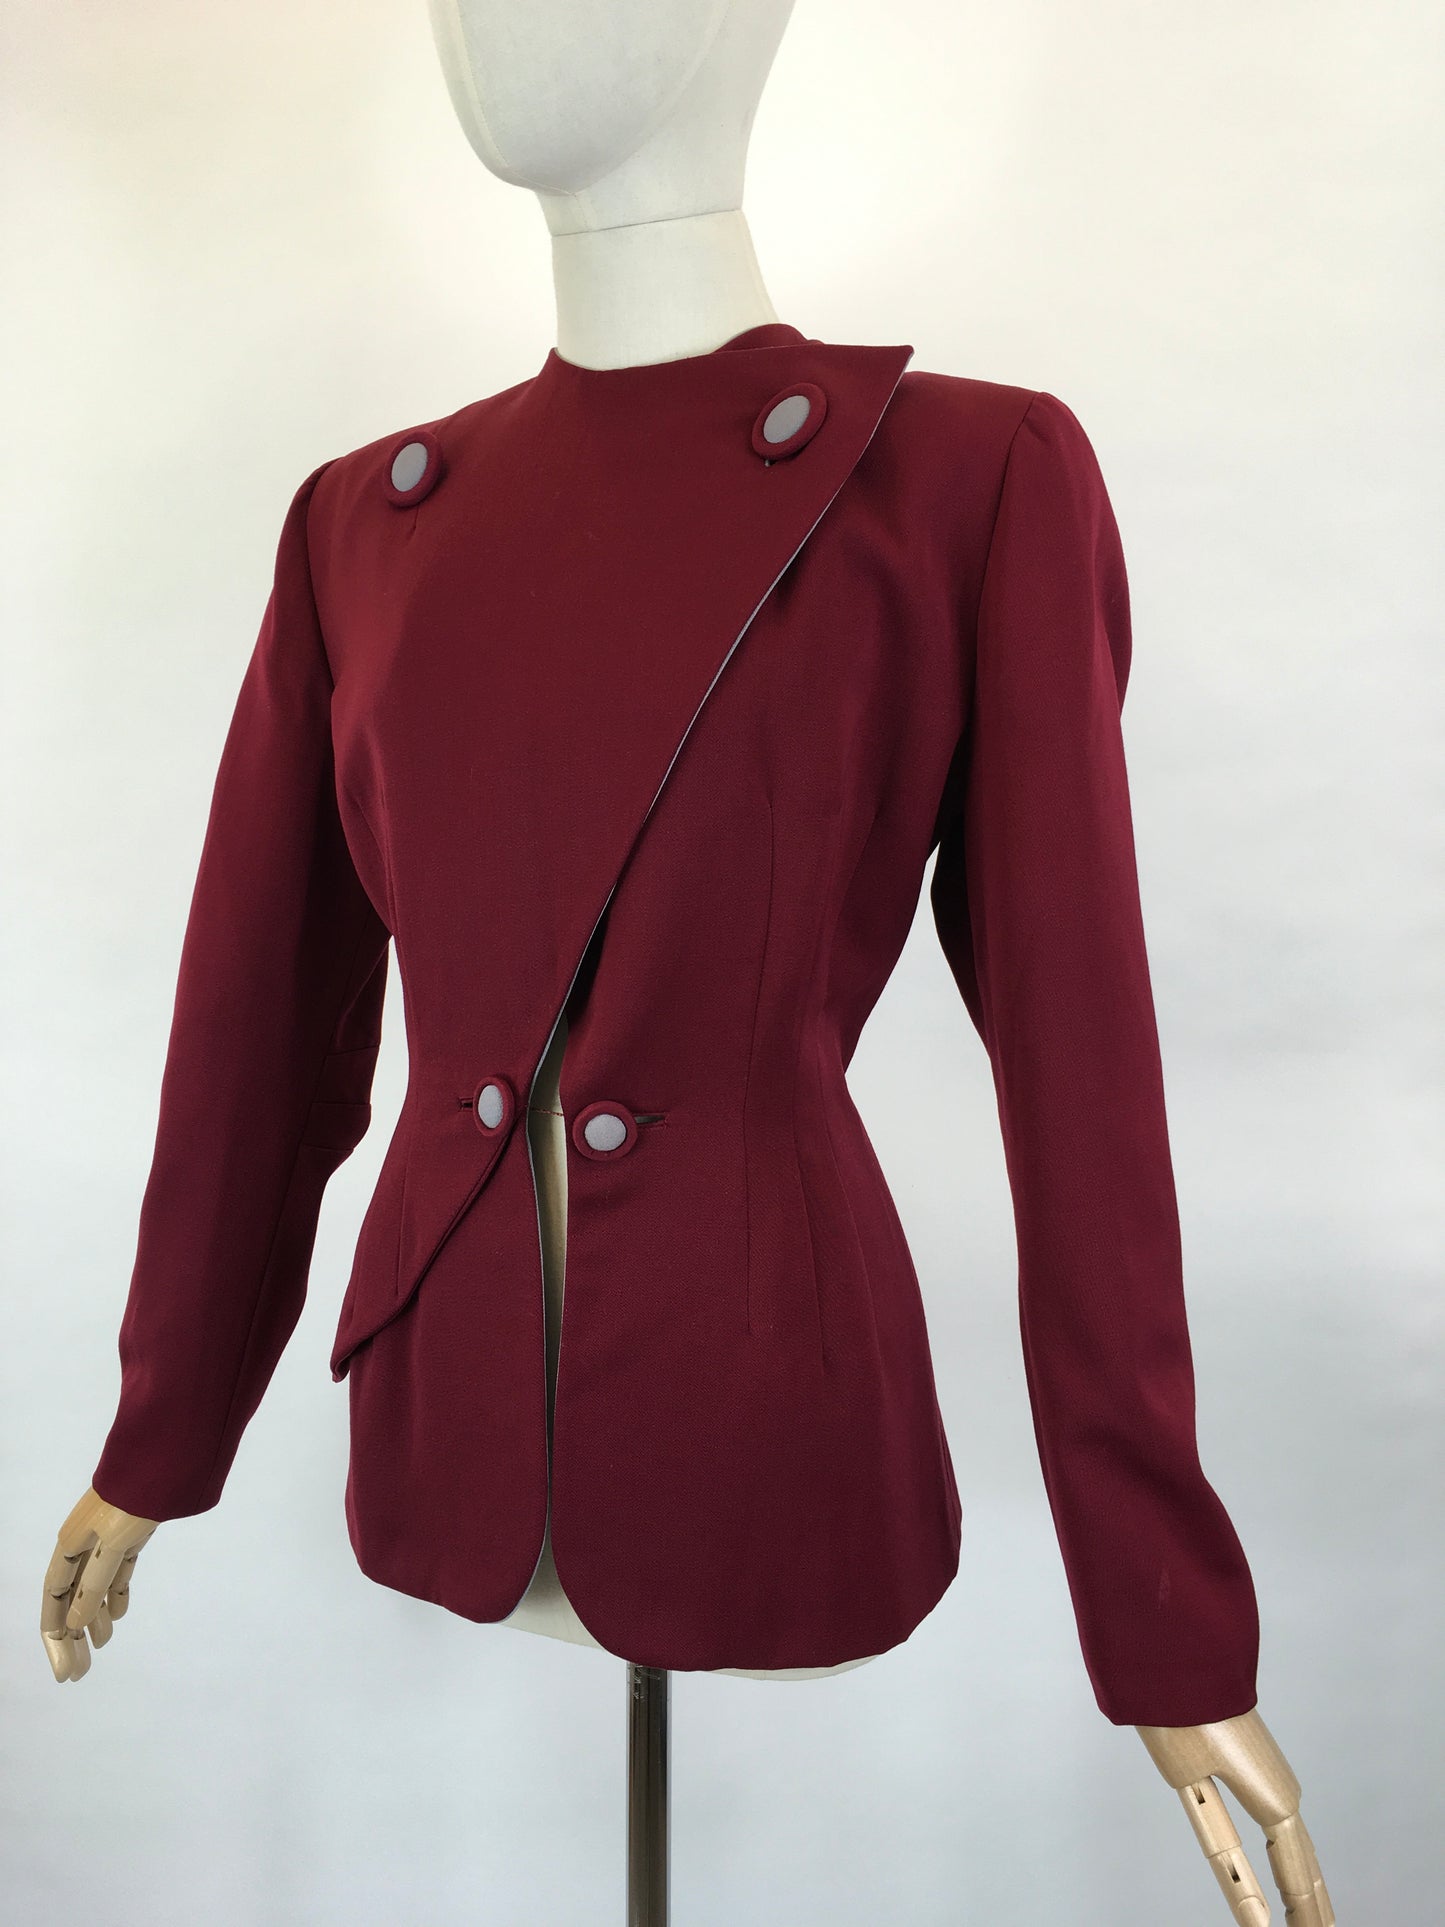 Original 1940’s SENSATIONAL 2 Tone Colour Block Jacket - In Warm Wine and French Grey